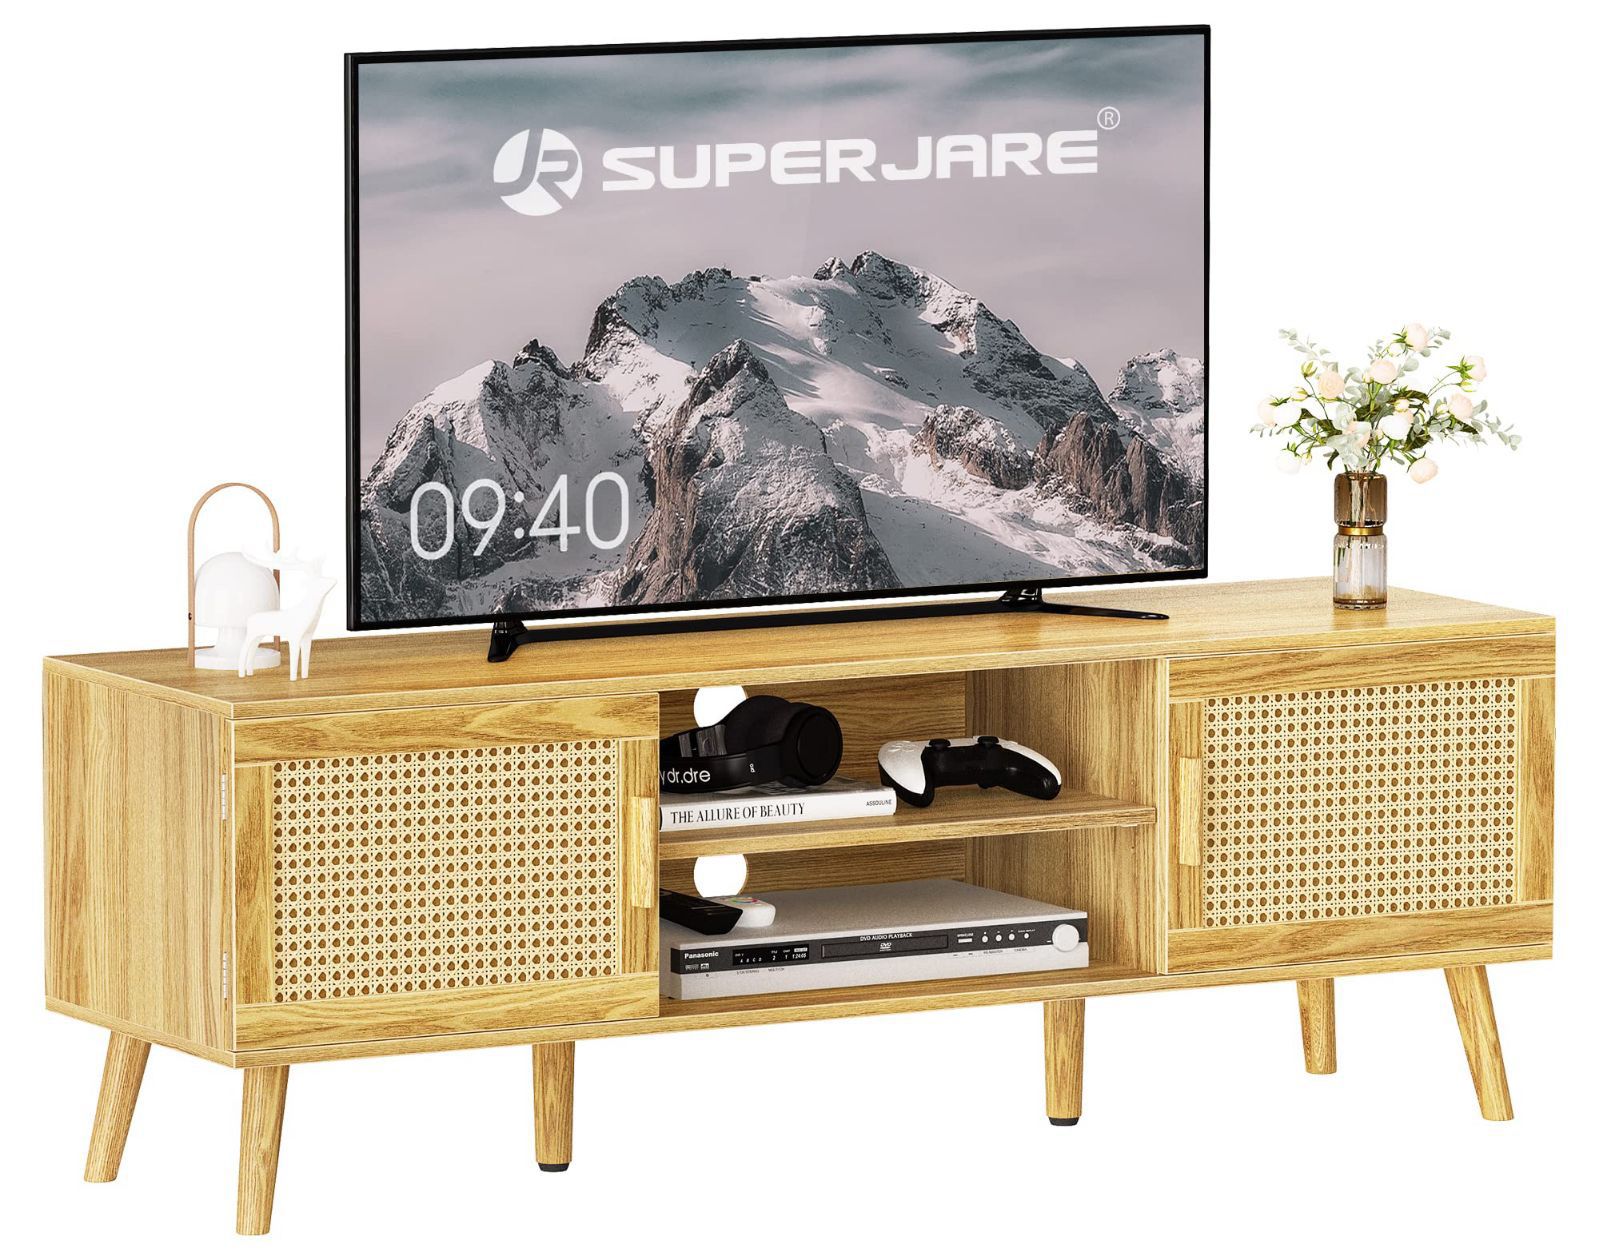 SUPERJARE Boho TV Stand For 55 Inch TV, Rattan TV Console With Adjustable Shelf, 2 PE Rattan Cabinet, Entertainment Center, Media Console, Solid Wood 